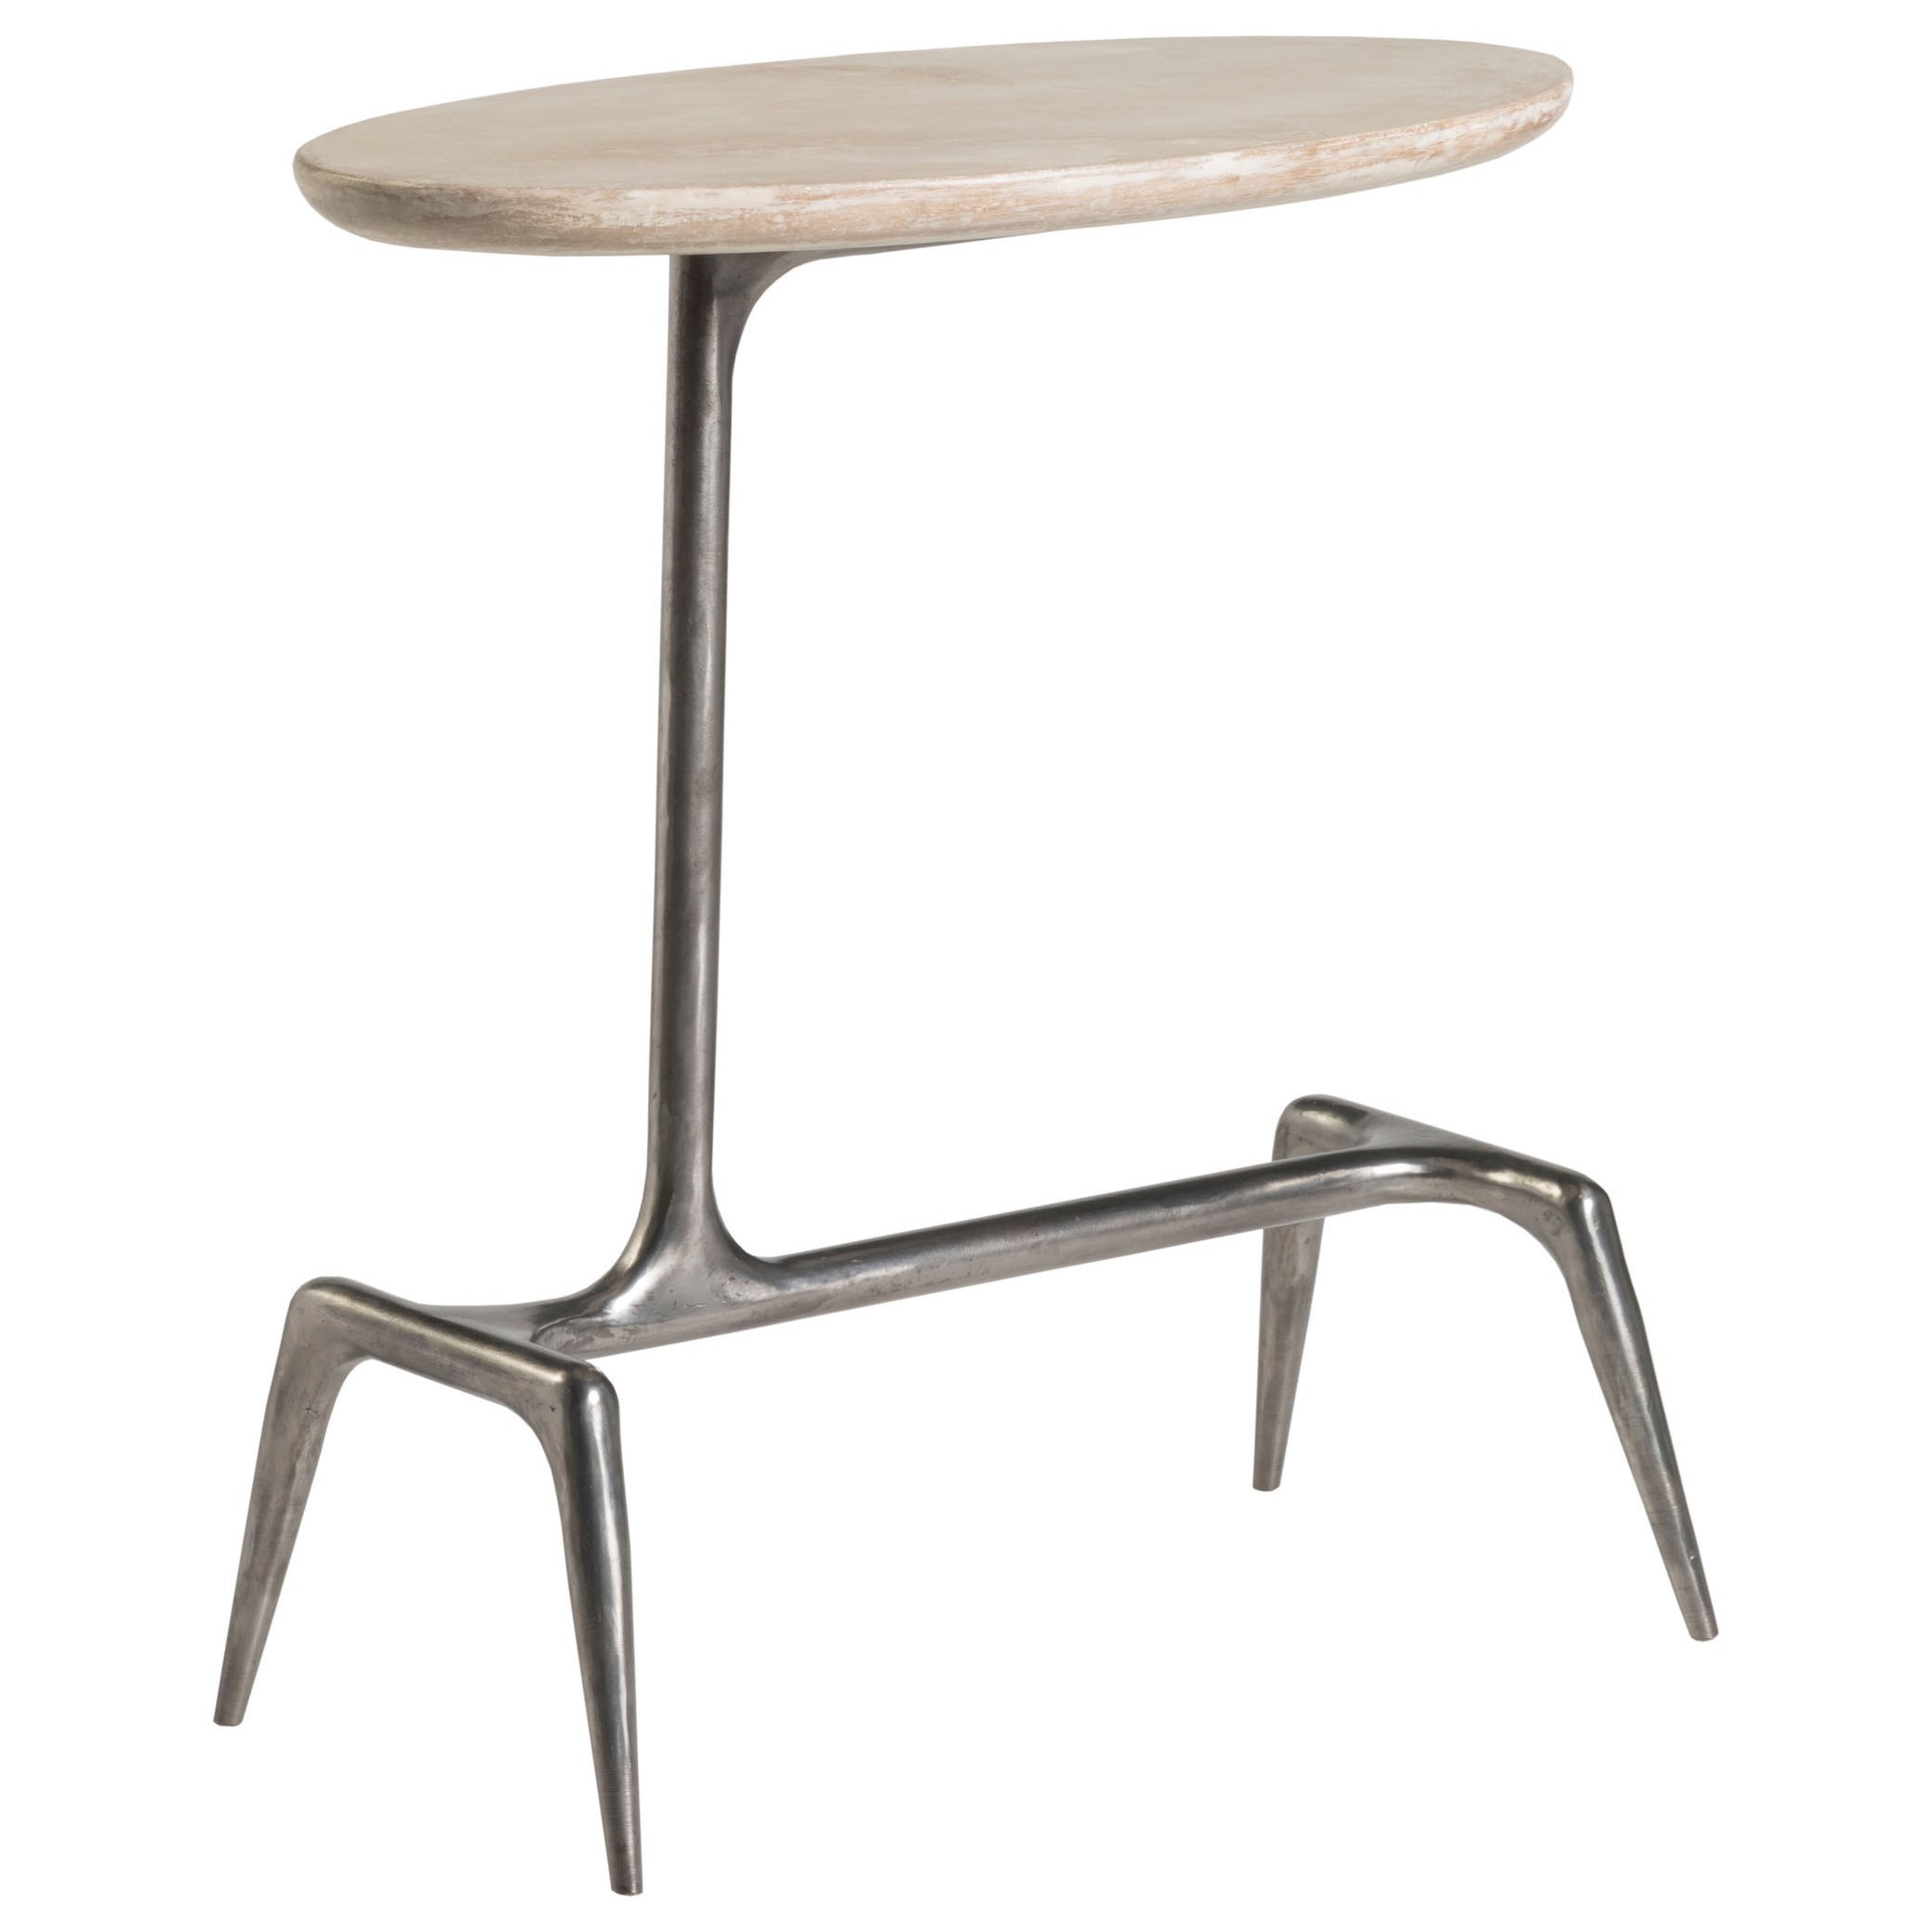 Contemporary Asymmetrical Oval Spot Table with Stone Top